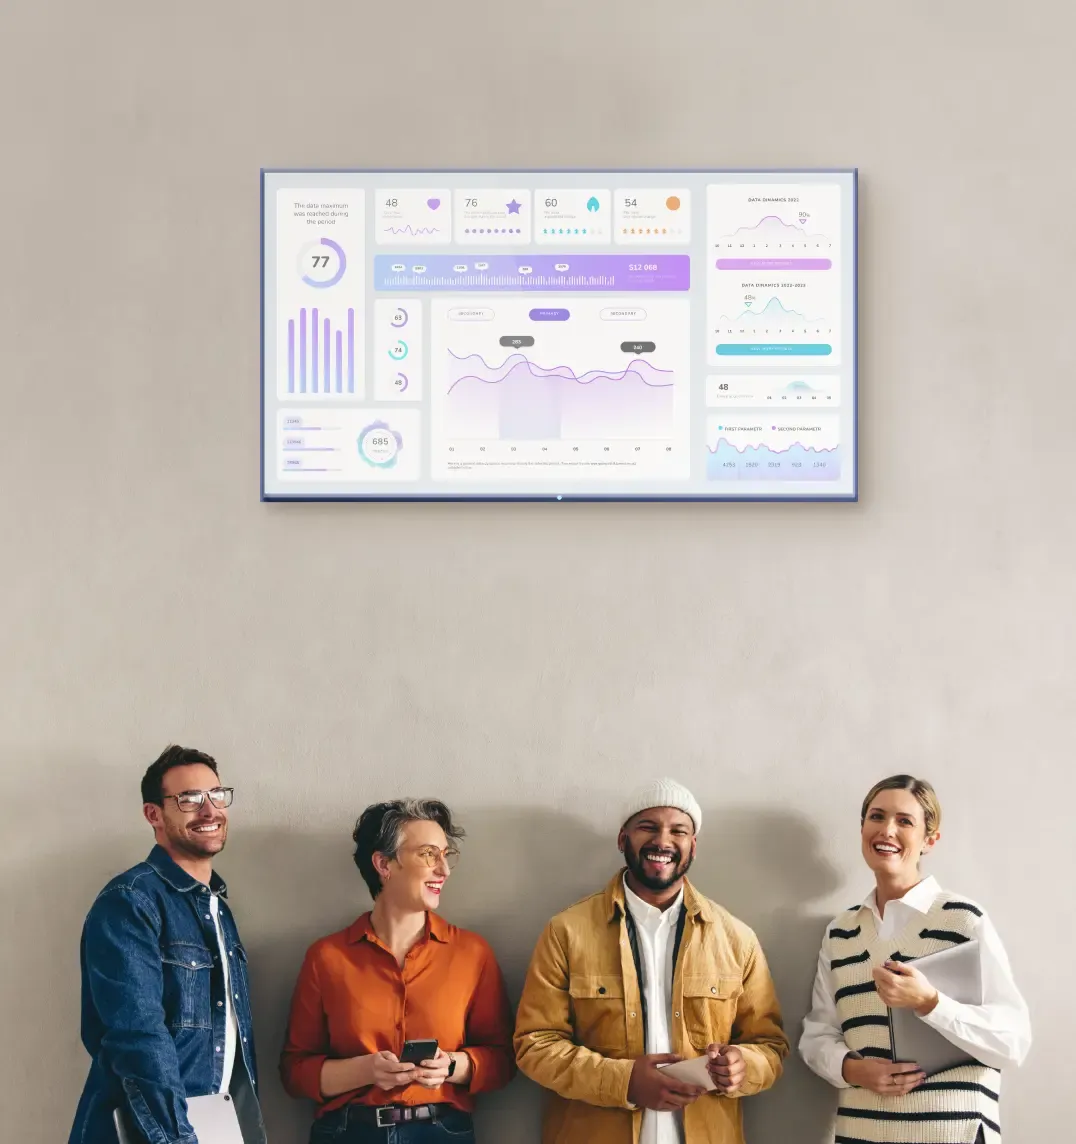 2 male employees and 2 female employees stand against a wall underneath a TV dashboard that's mounted on the wall and displaying mockup business intelligence data.2 male employees and 2 female employees stand against a wall underneath a TV dashboard that's mounted on the wall and displaying mockup business intelligence data.